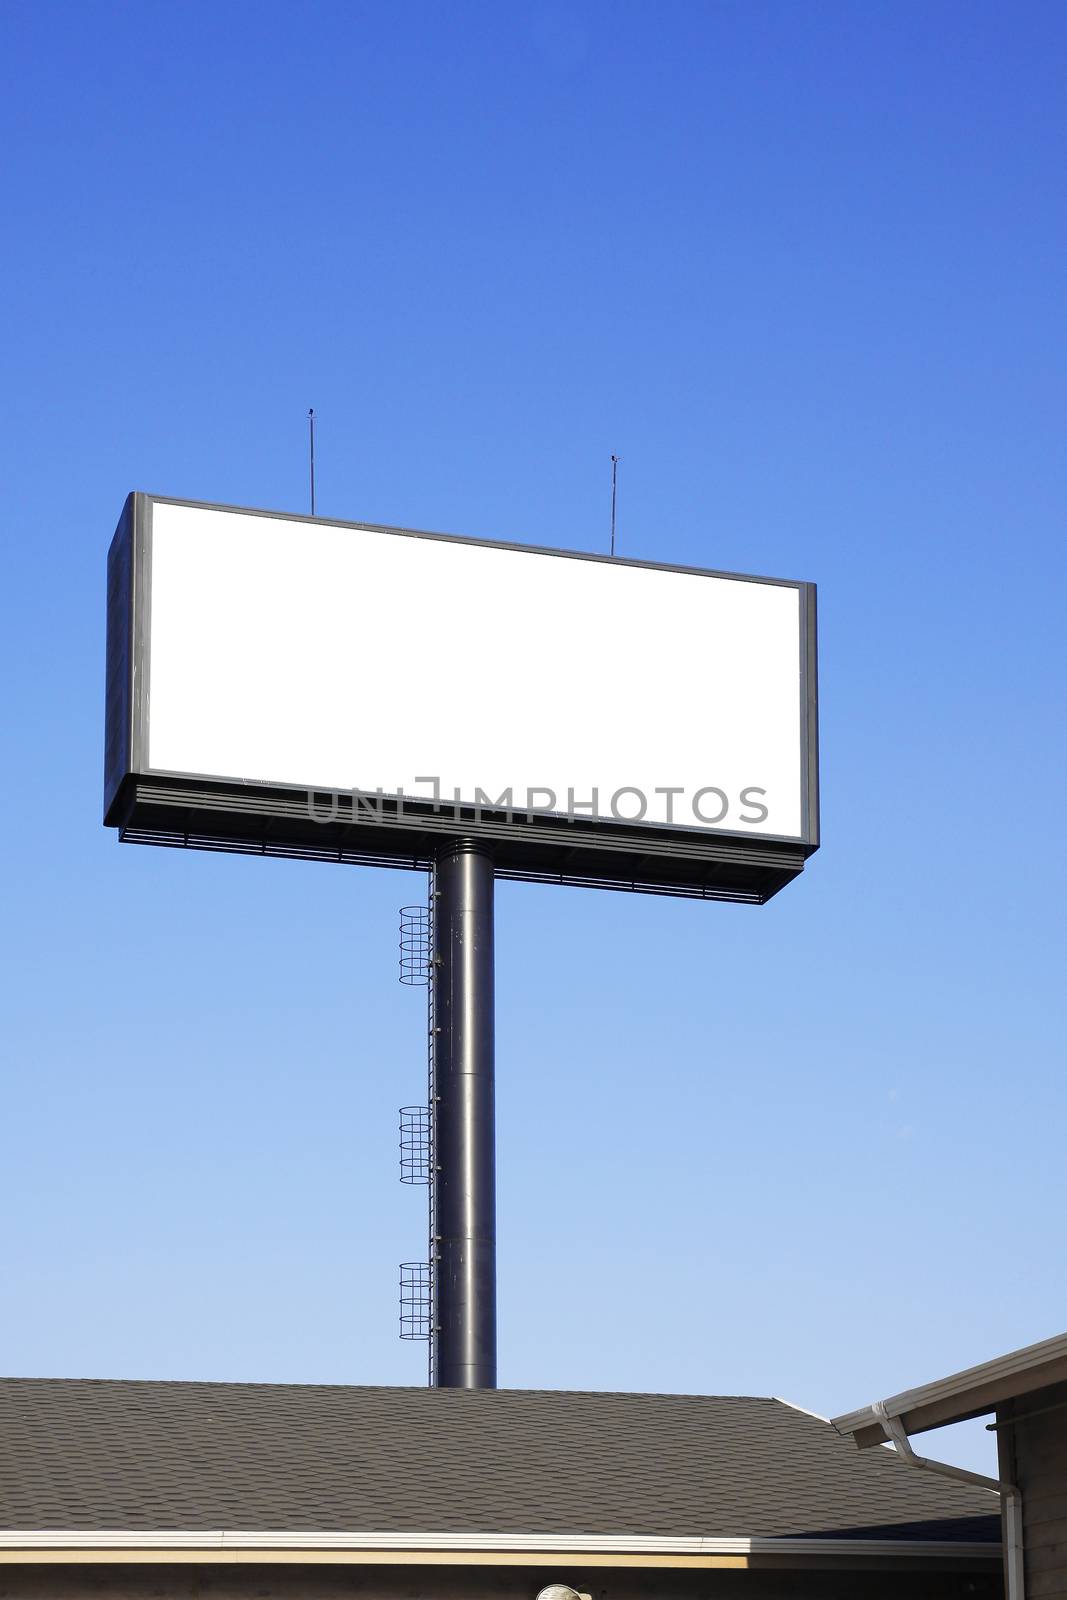 Blank billboard with space for your advertisement against blue sky